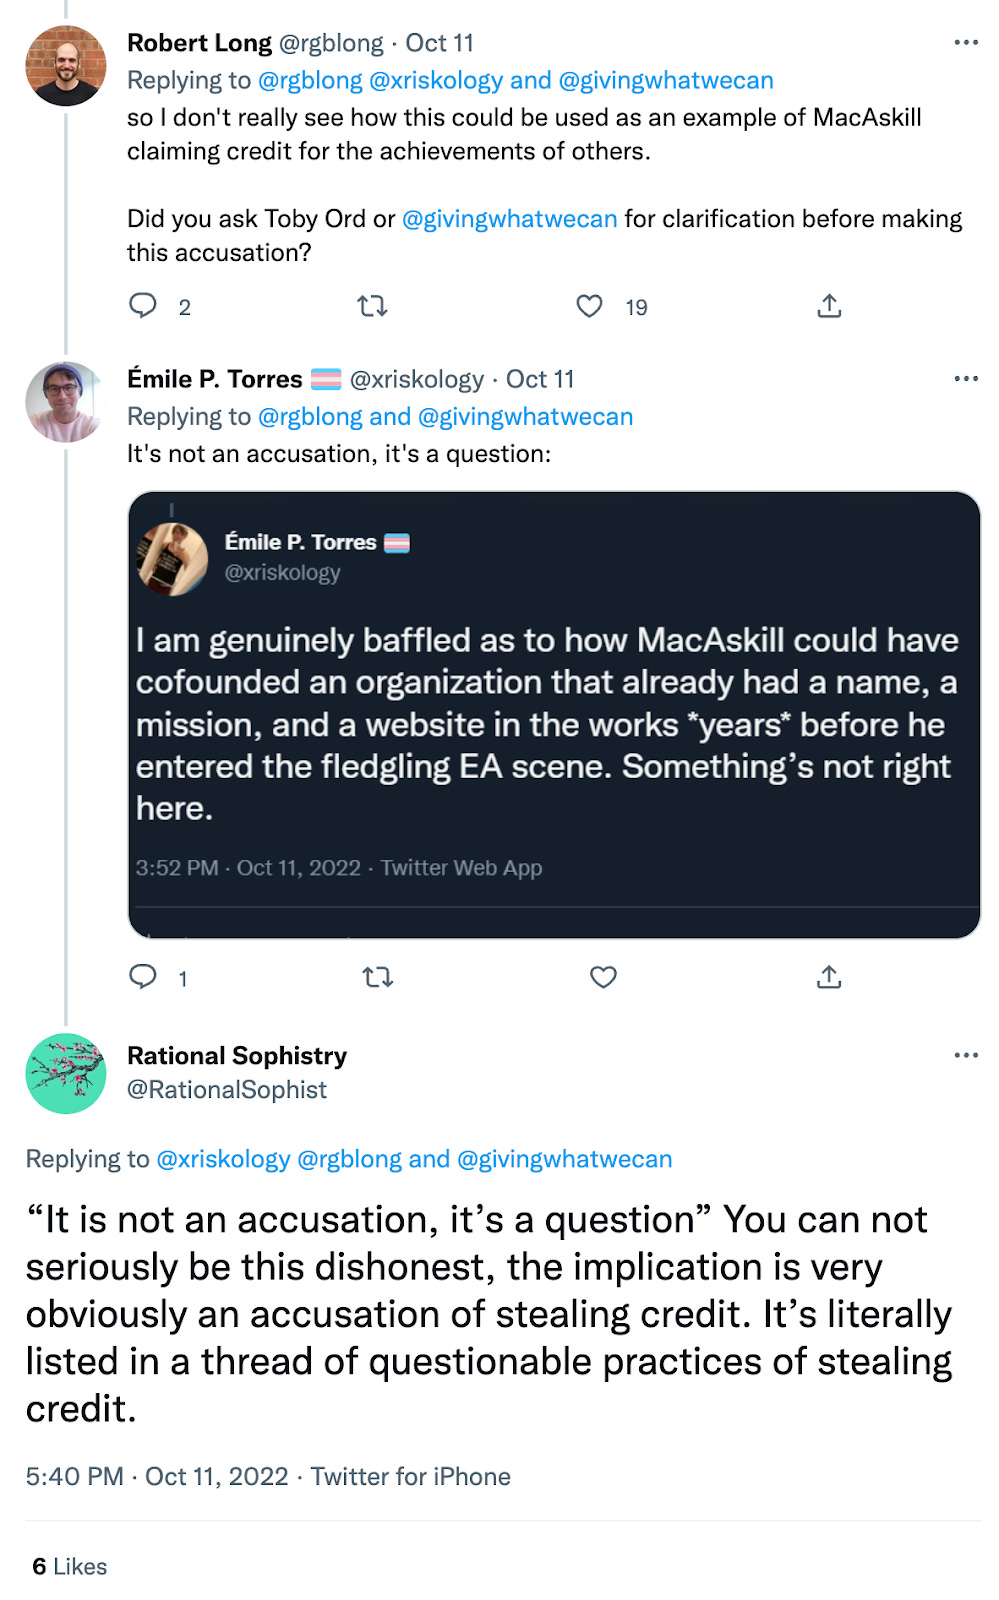 Robert Long: so I don't really see how this could be used as an example of MacAskill claiming credit for the achievements of others. Did you ask Toby Ord or @givingwhatwecan for clarification before making this accusation? Emile P. Torres: It's not an accusation, it's a question: I am genuinely baffled as to how MacAskill could have cofounded an organization that already had a name, a mission, and a website in the works *years* before he entered the fledgling EA scene. Something's not right here. Rational Sophistry: "It is not an accusation, it's a question" You cannot seriously be this dishonest, the implication is very obviously an accusation of stealing credit. It's literally listed in a thread of questionable practices of stealing credit.